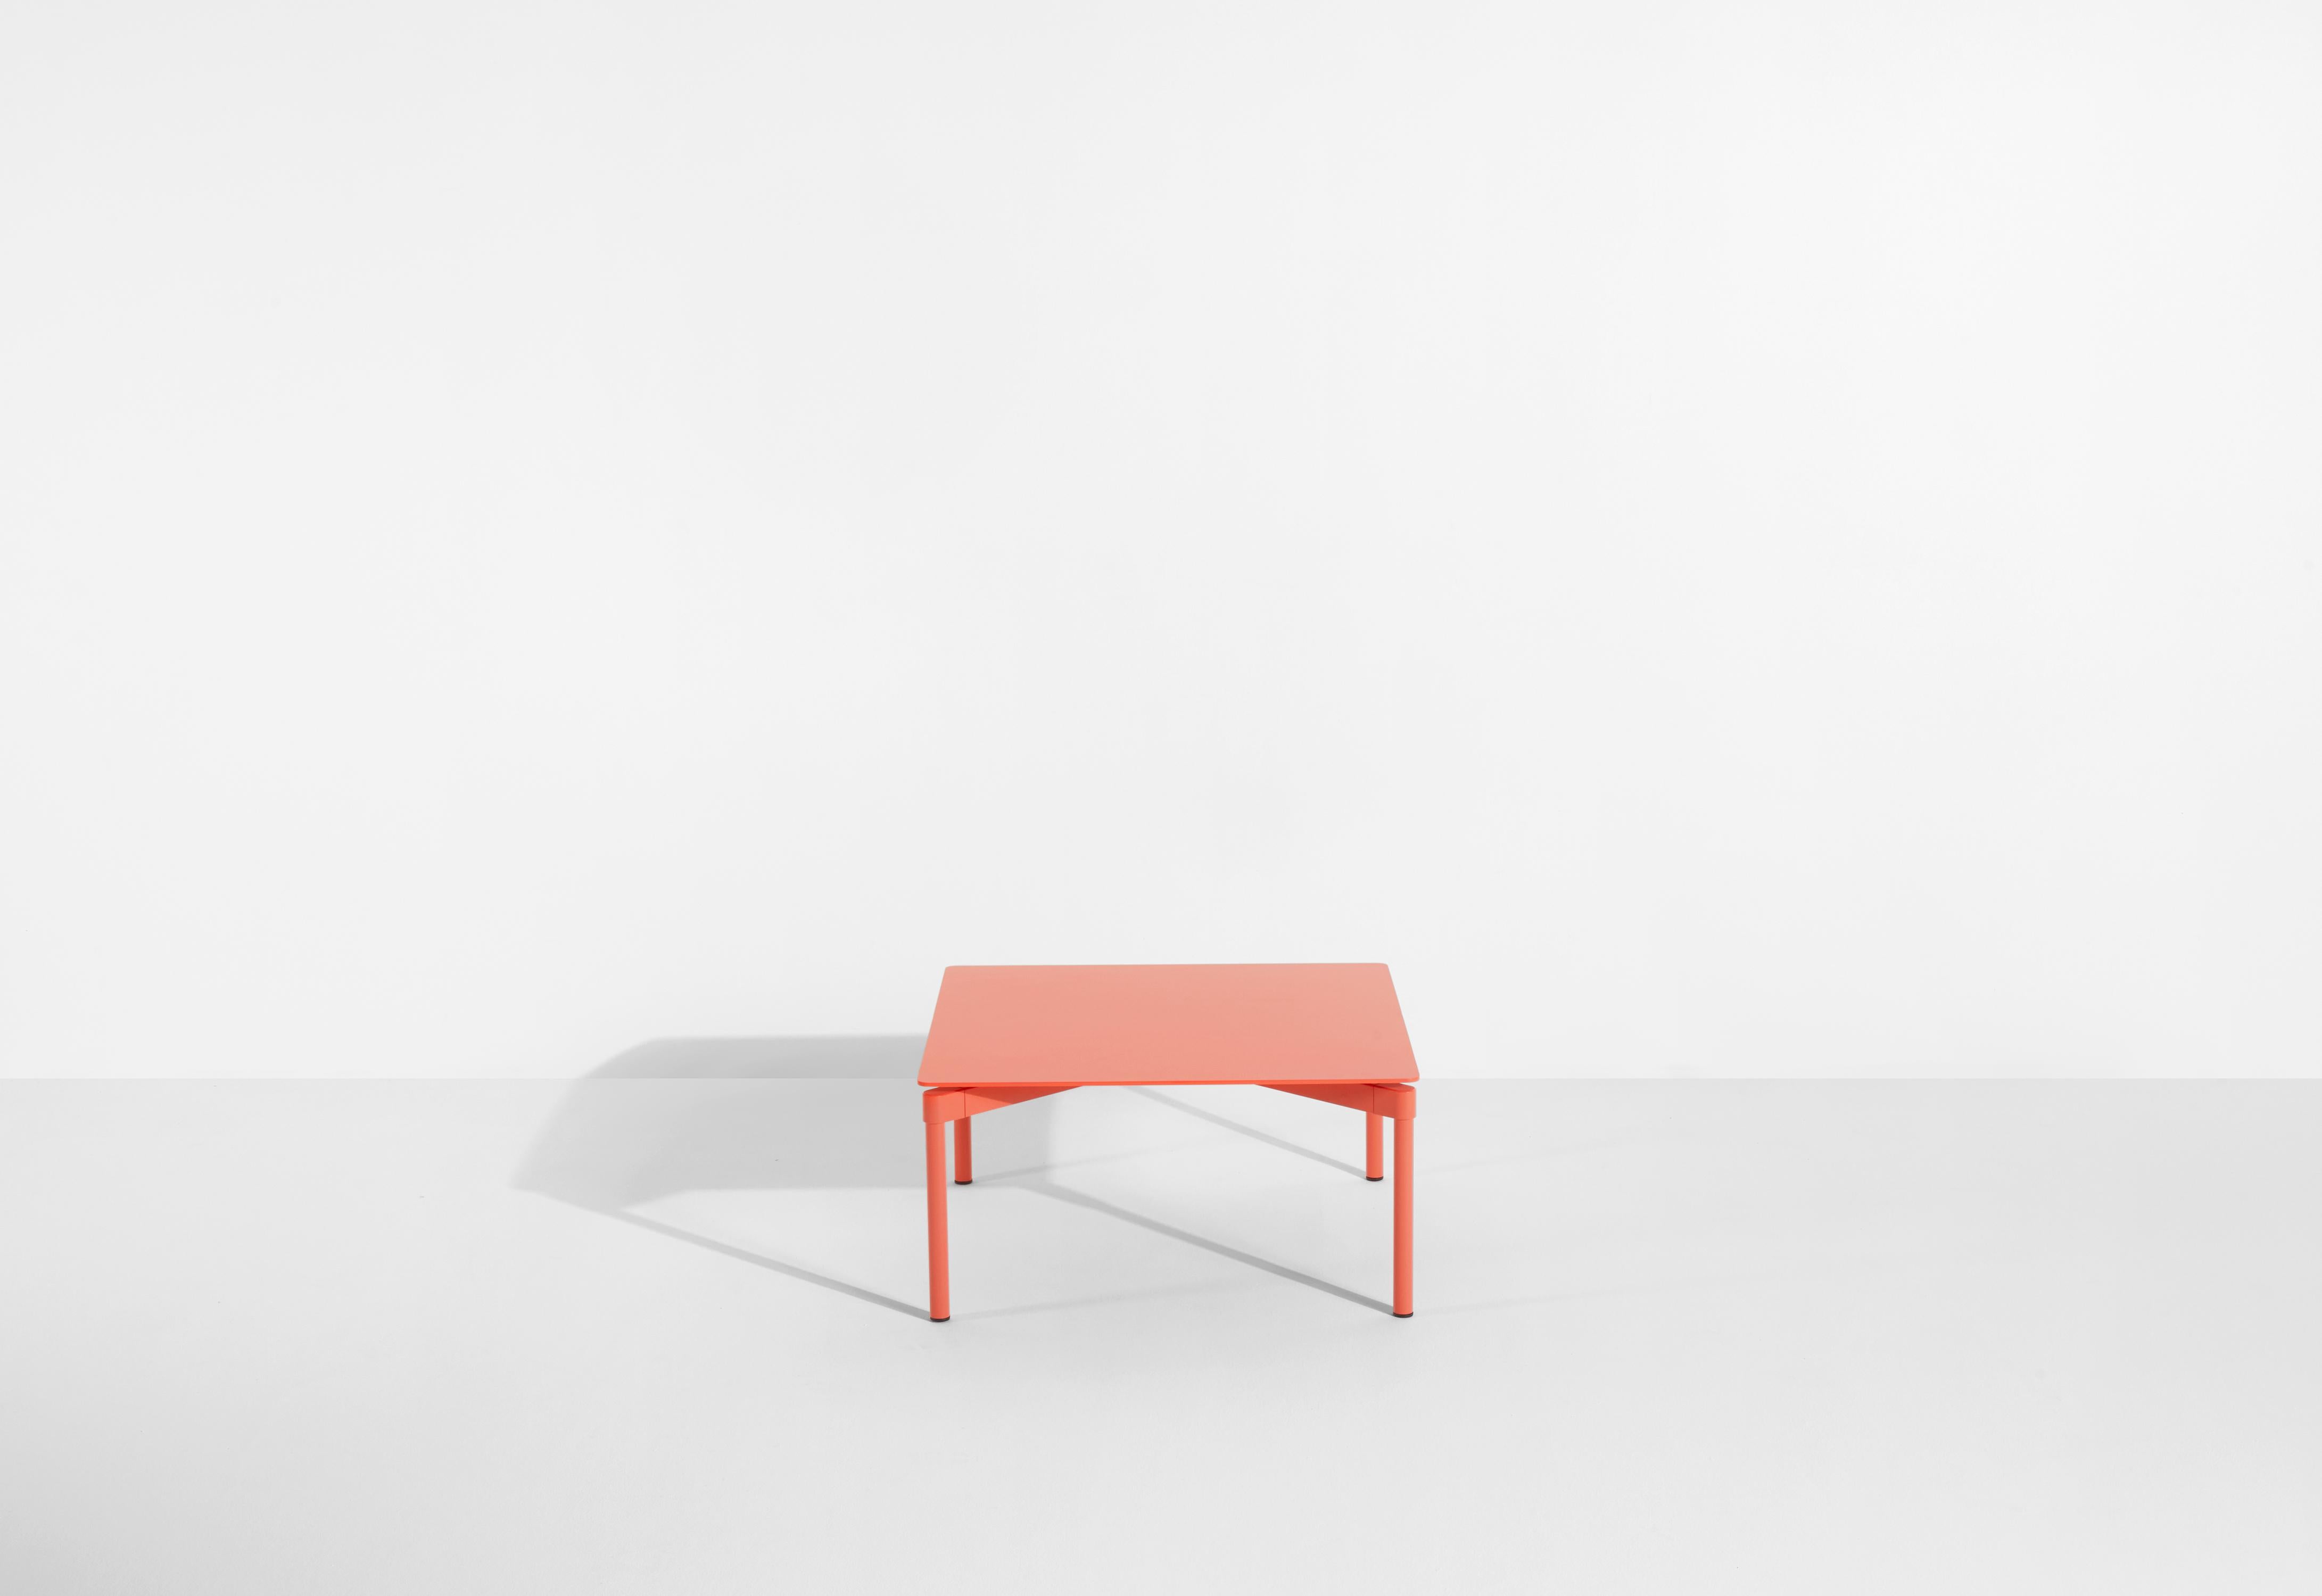 Petite Friture Fromme Coffee Table in Coral Aluminium by Tom Chung, 2020 In New Condition For Sale In Brooklyn, NY